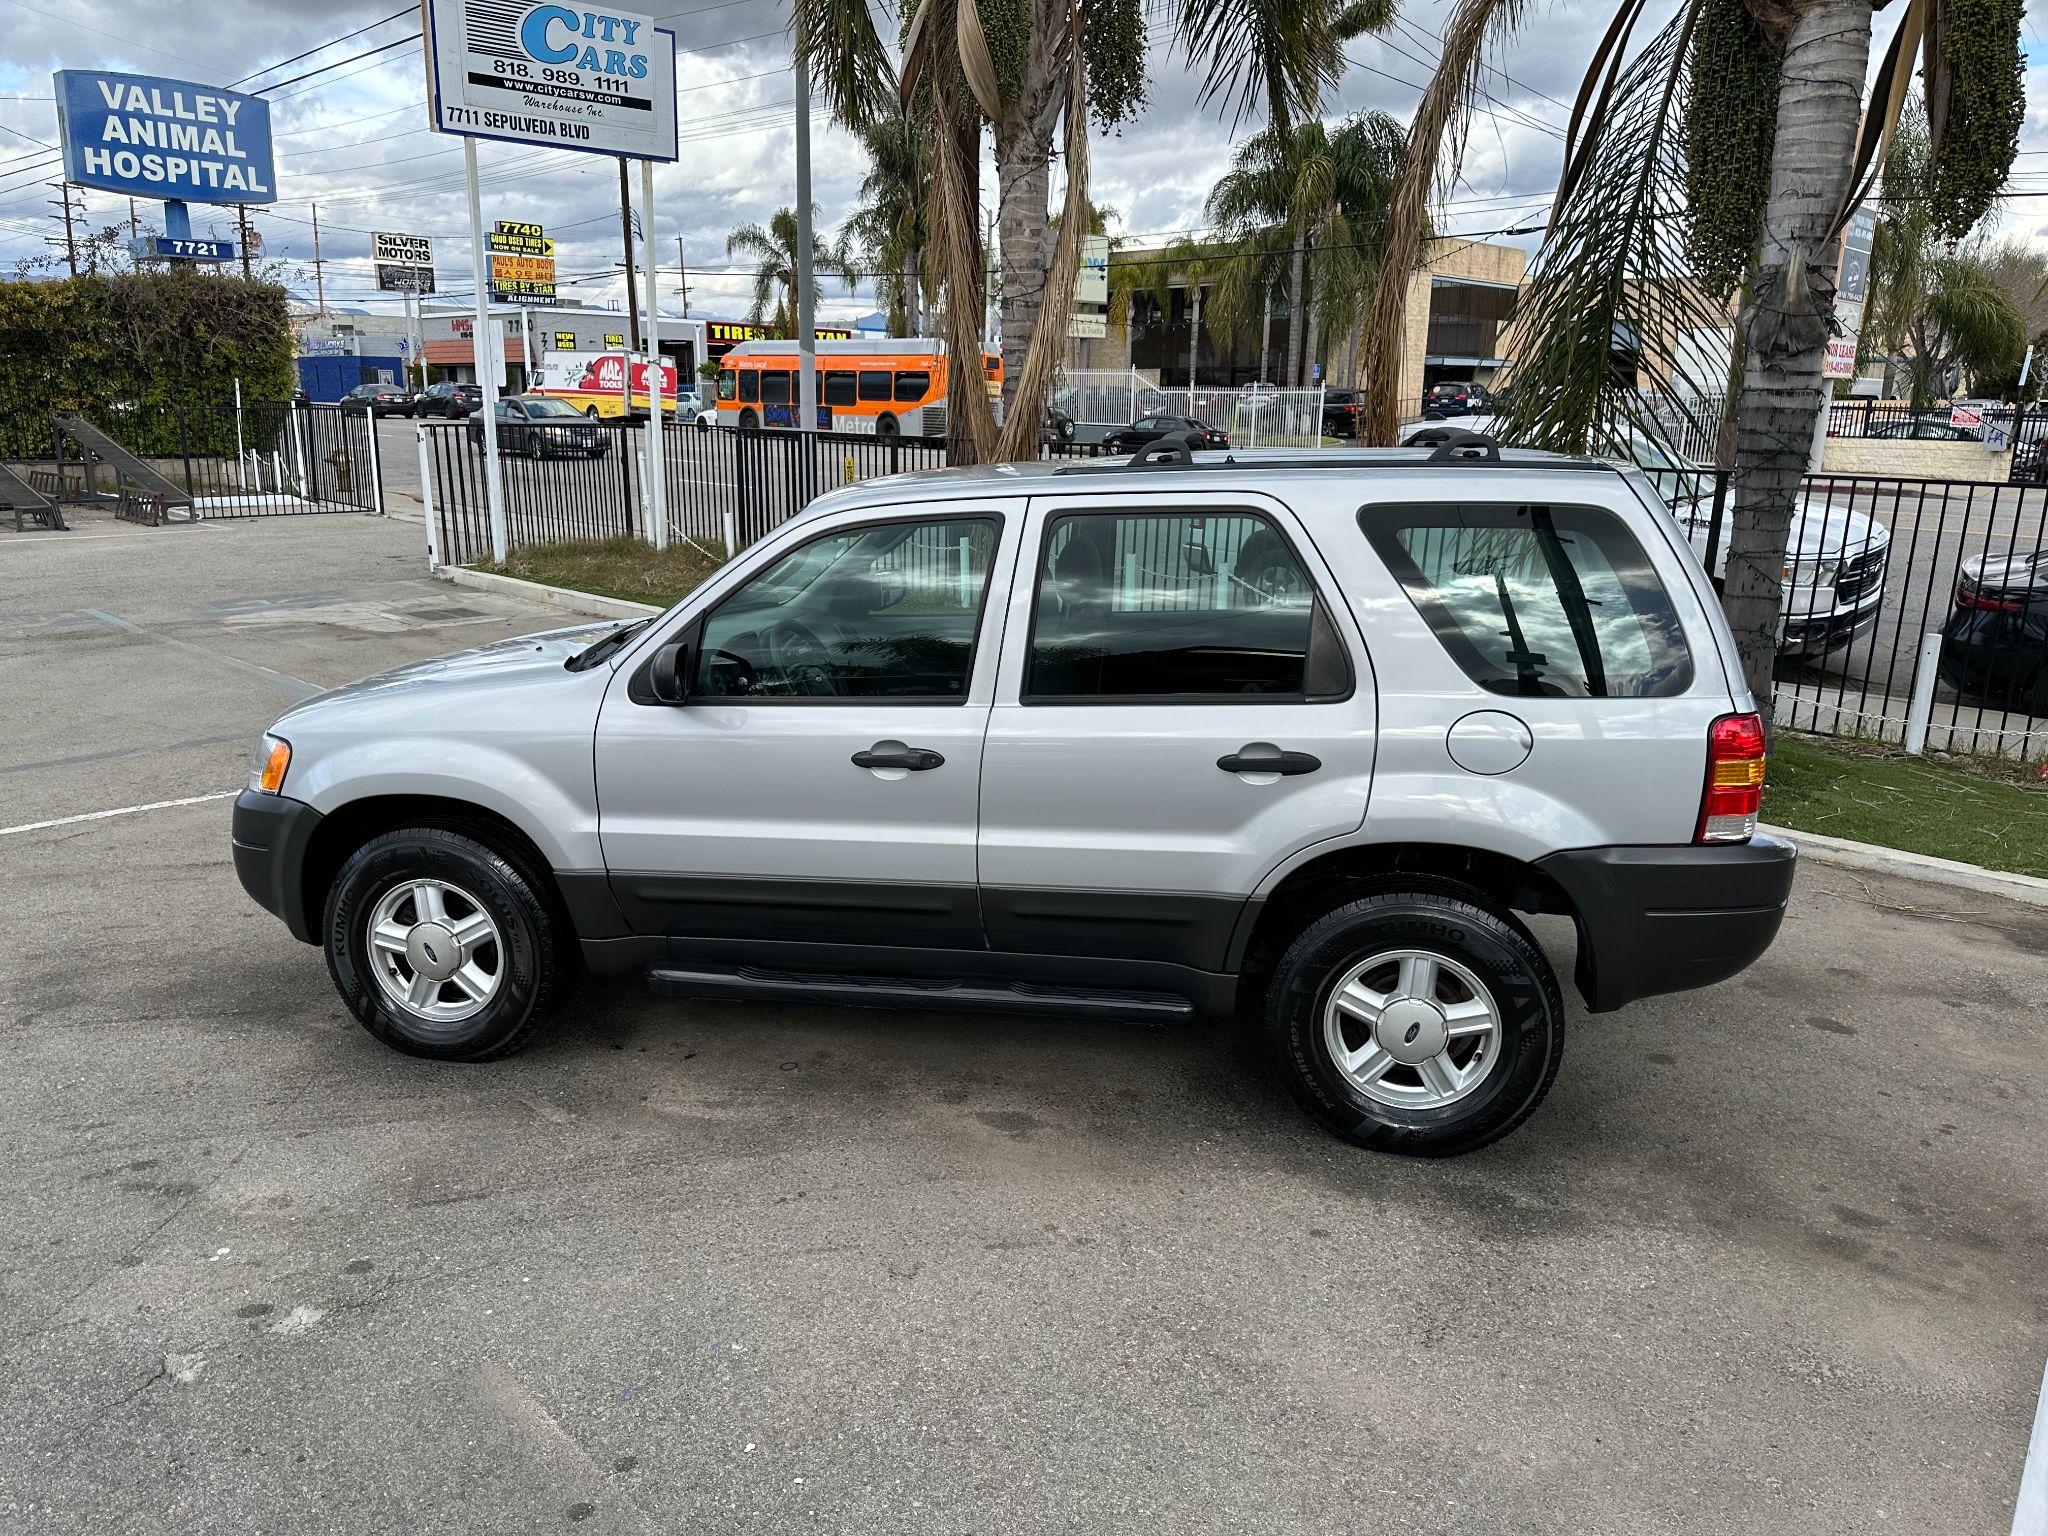 2003 Ford ESCAPE XLT